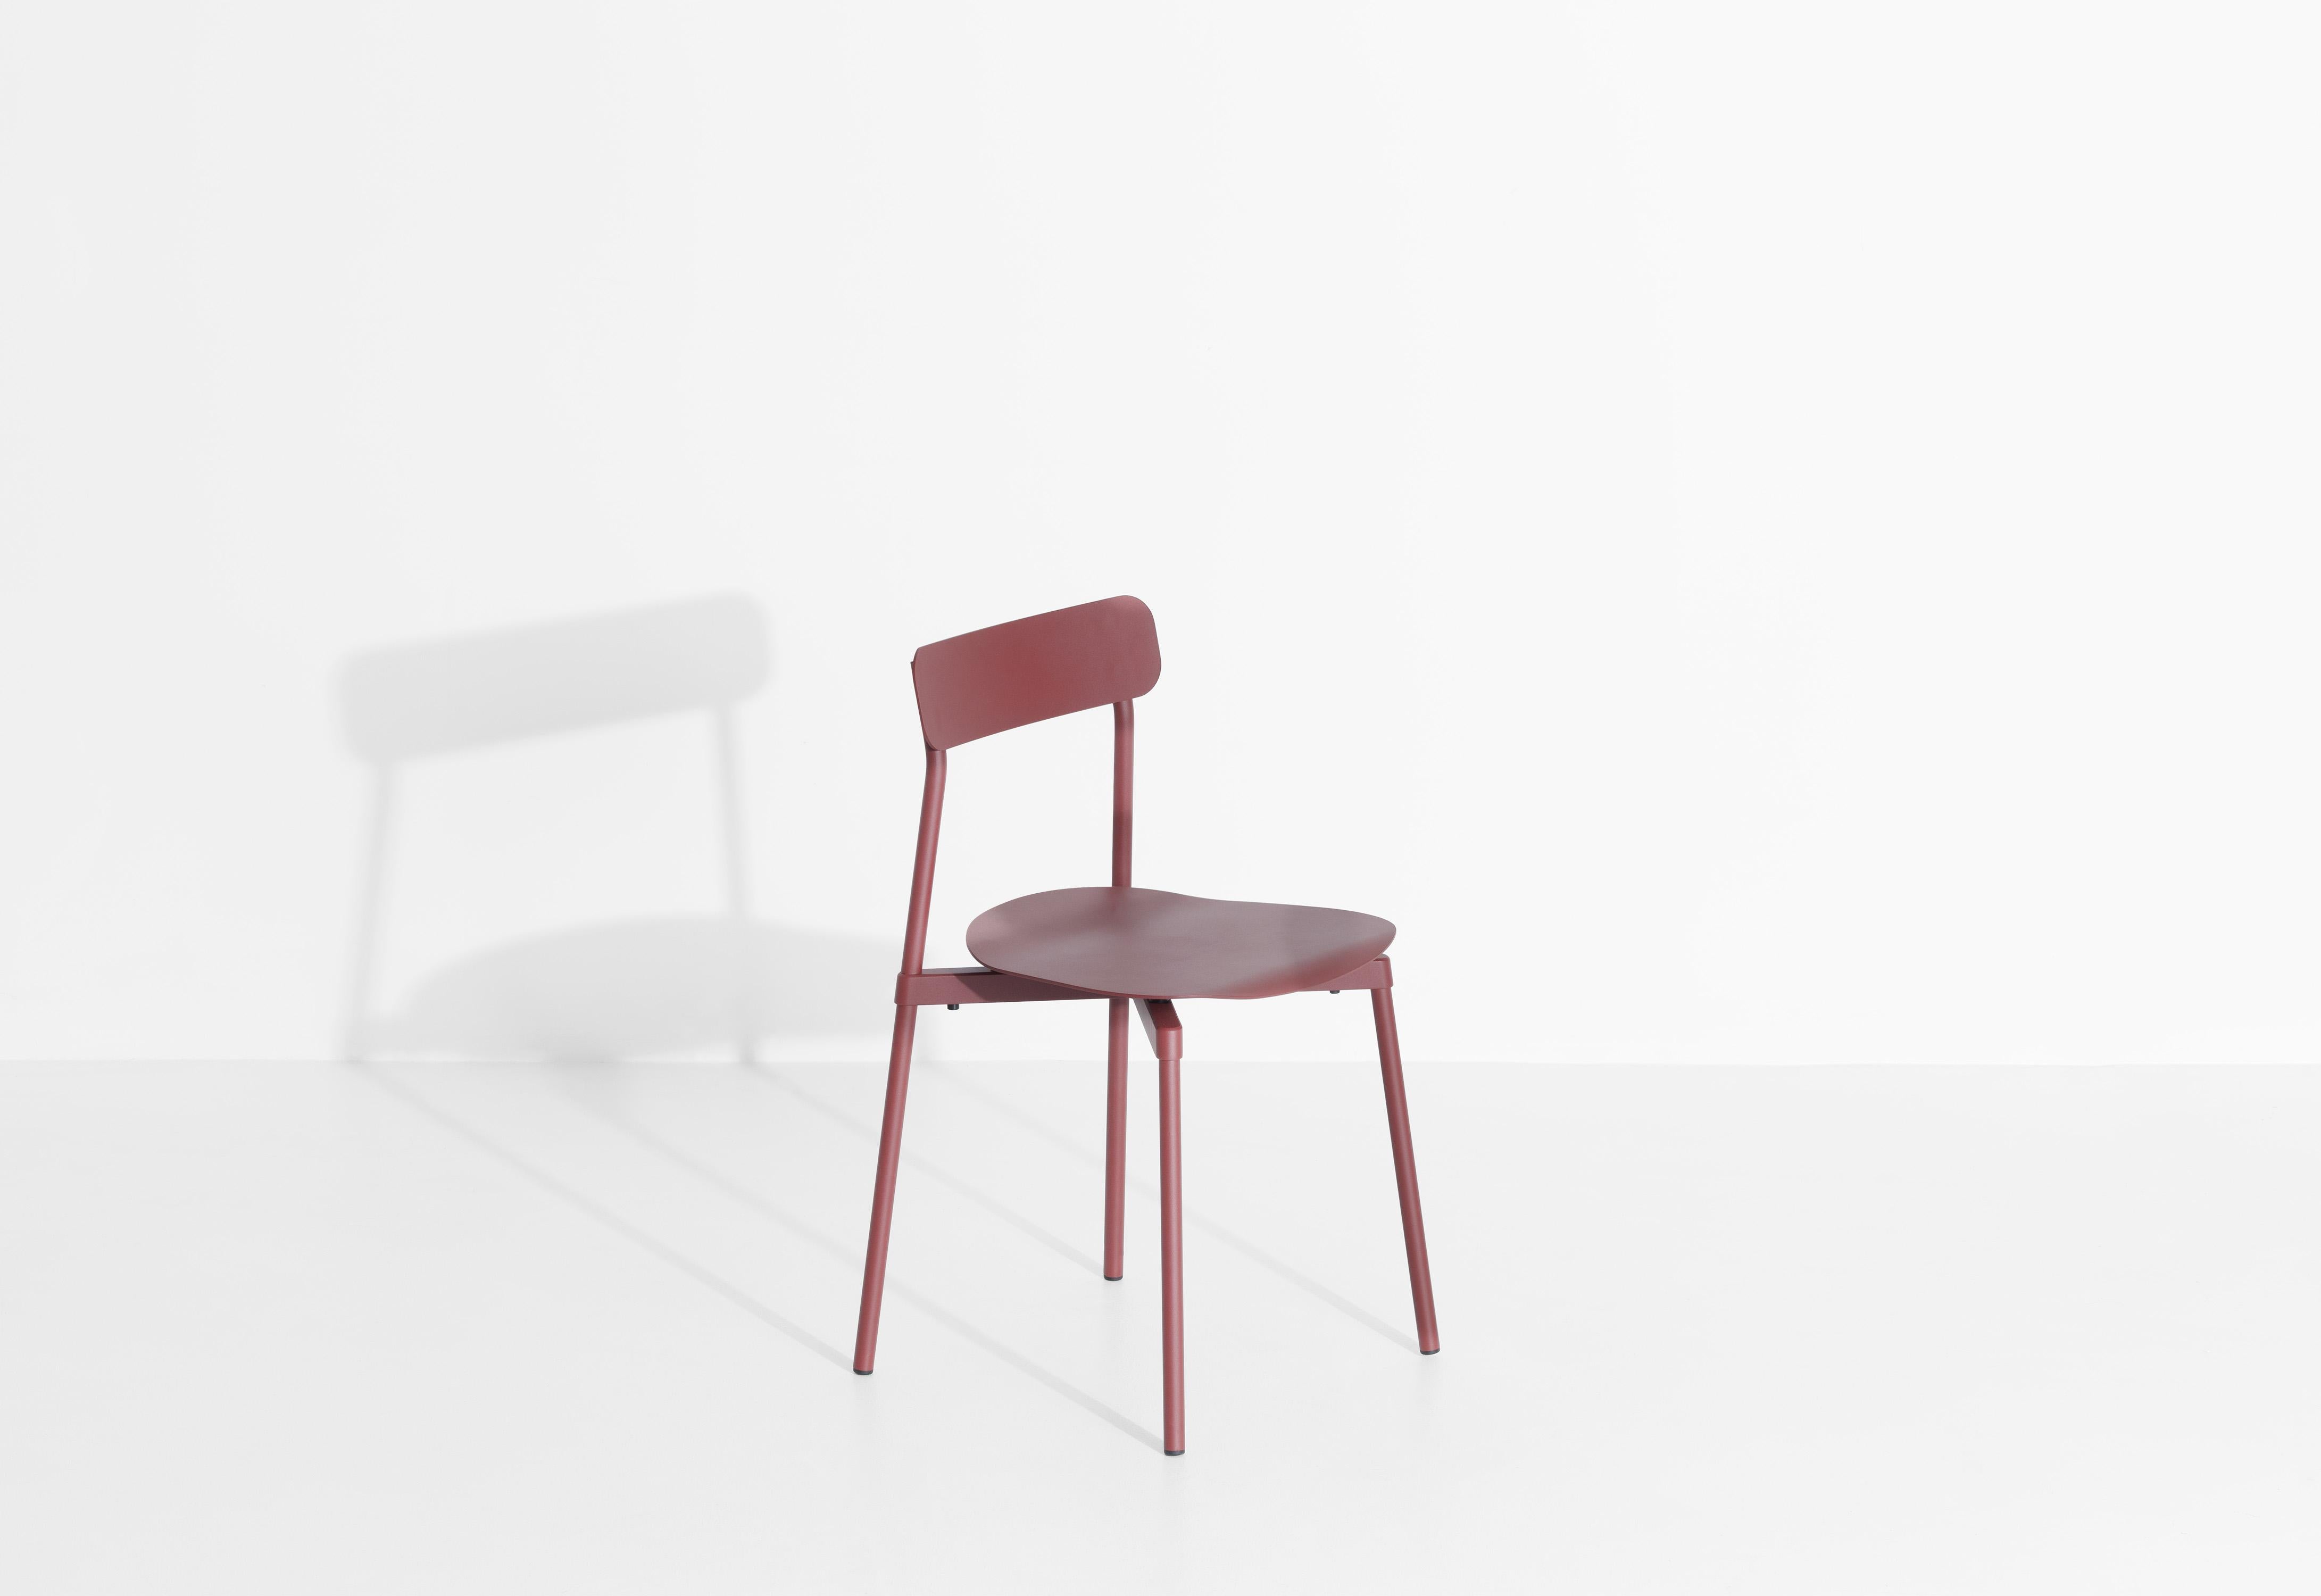 Contemporary Petite Friture Fromme Chair in Brown-Red Aluminium by Tom Chung, 2019 For Sale